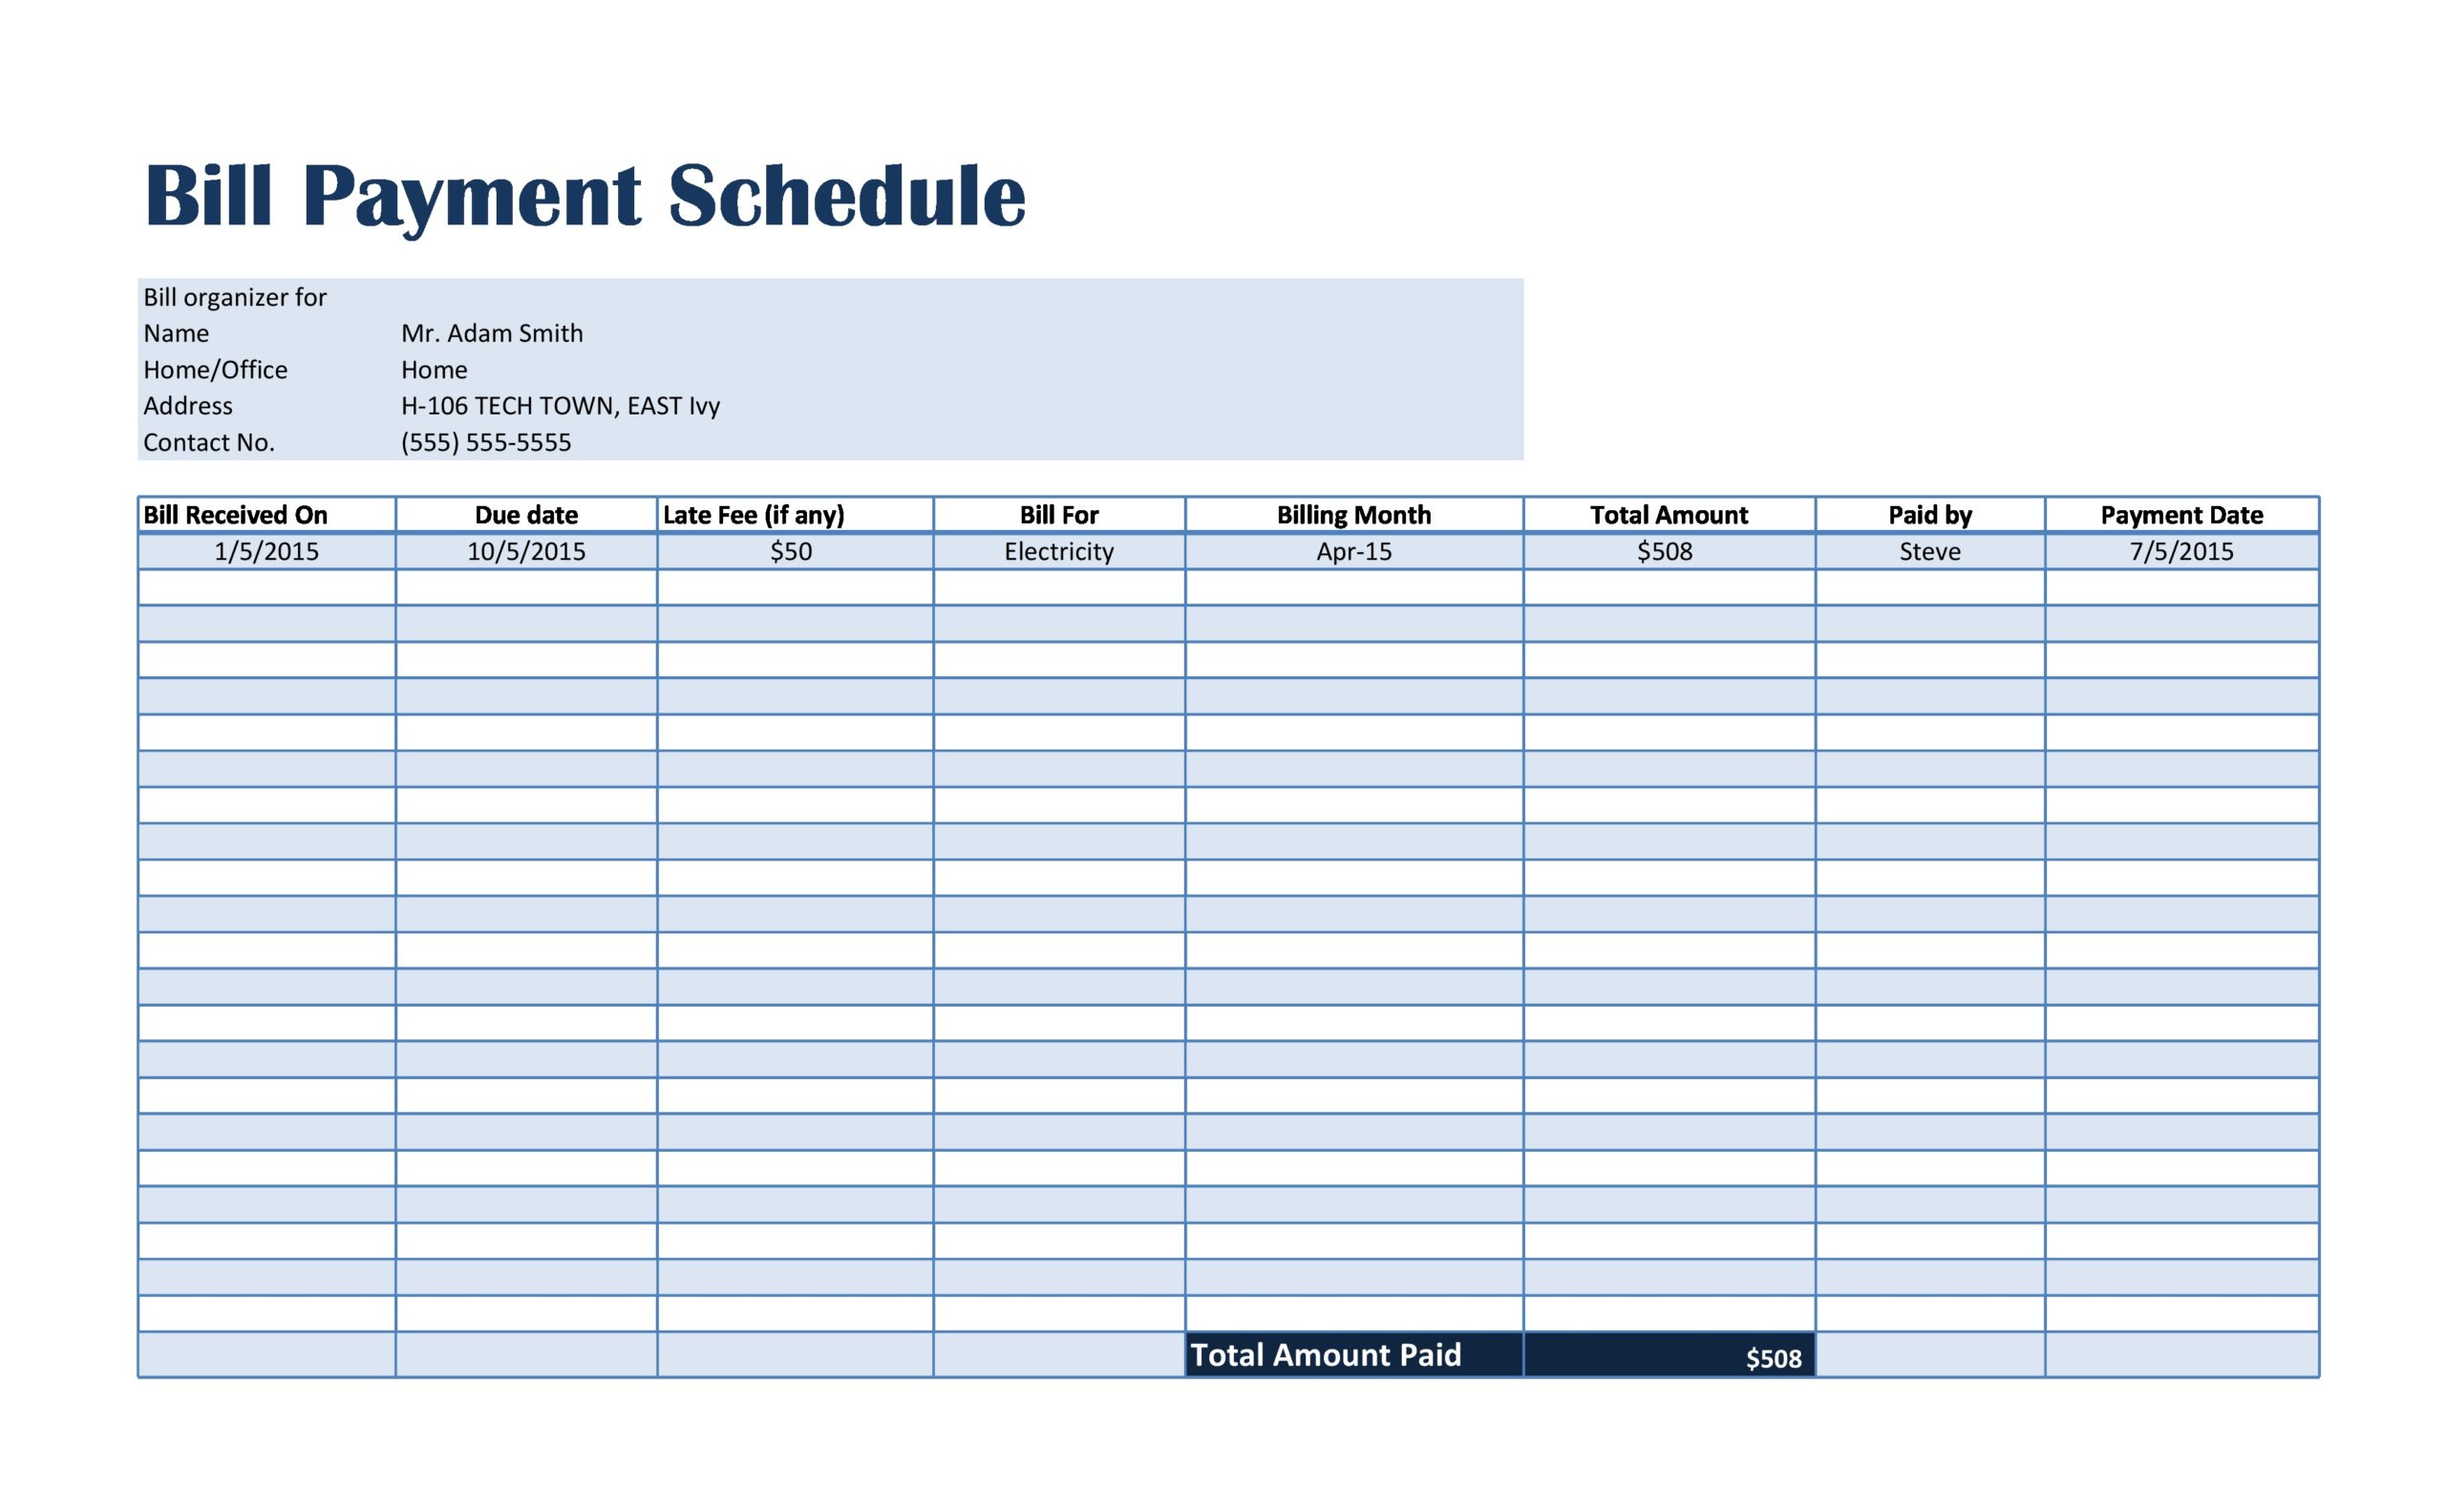 printable-payment-schedule-template-printable-world-holiday